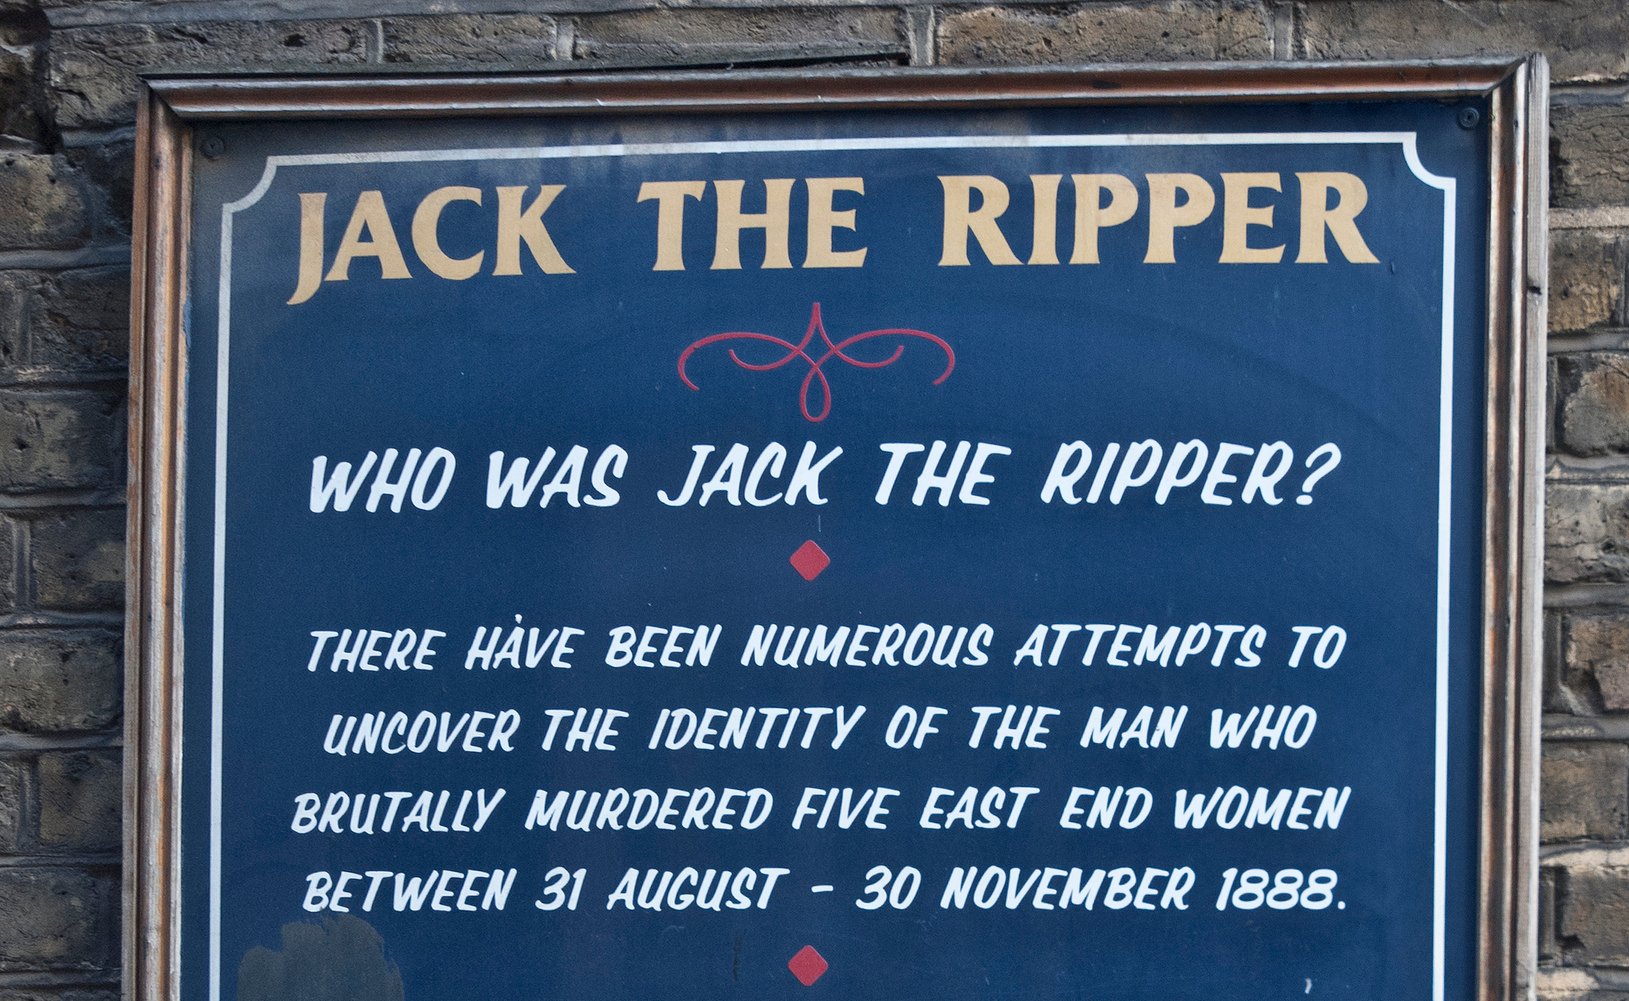 Jack the Ripper Identity Confirmed by Daily Mail Not Science | The Mary Sue1629 x 1001